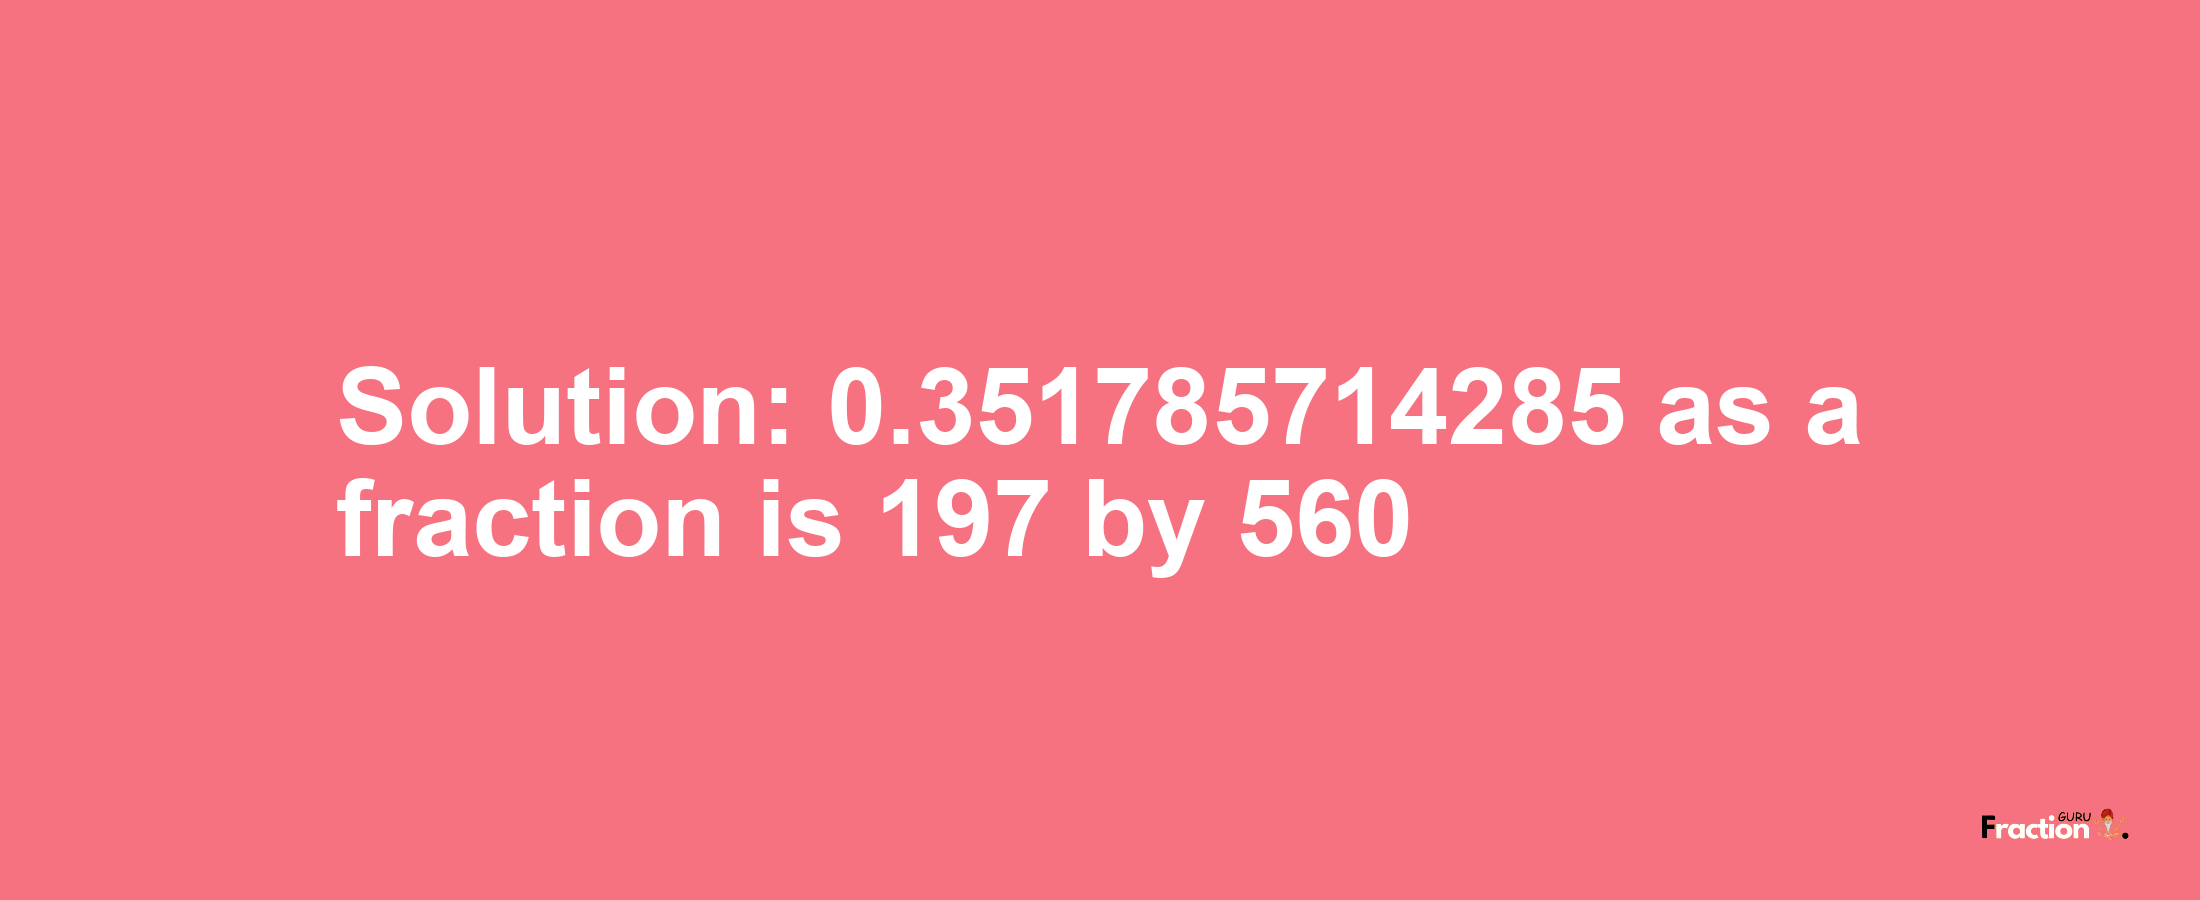 Solution:0.351785714285 as a fraction is 197/560